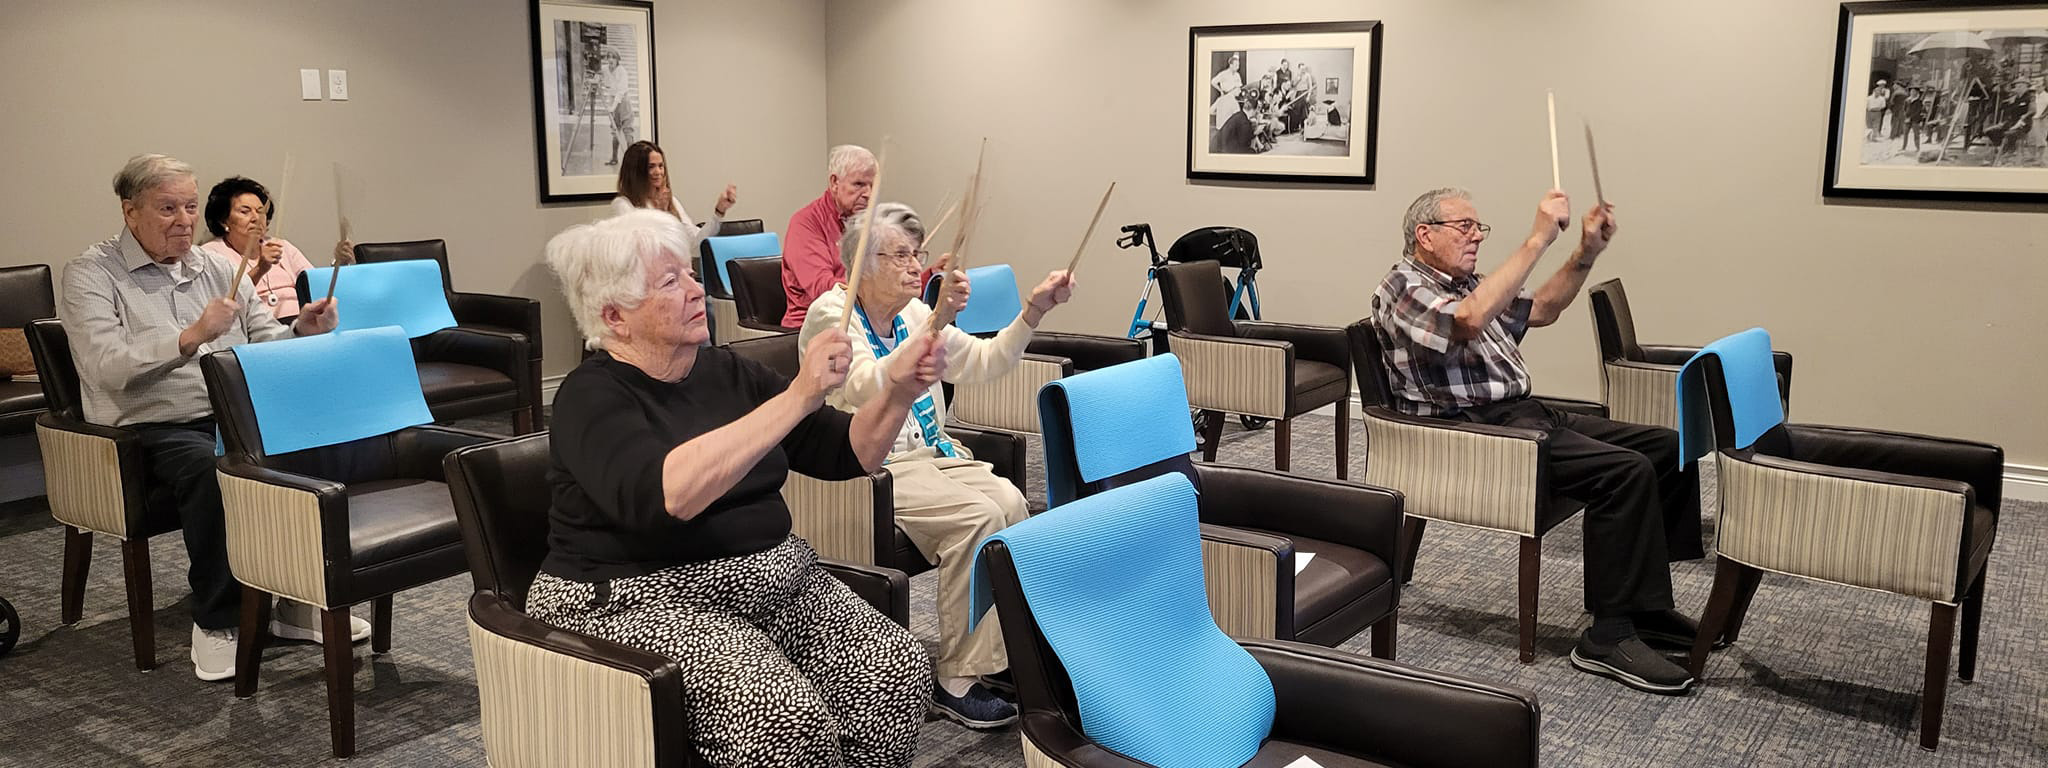 Active seniors participating in a fitness drumming class at Vitalia Westlake Senior Living, arms raised.